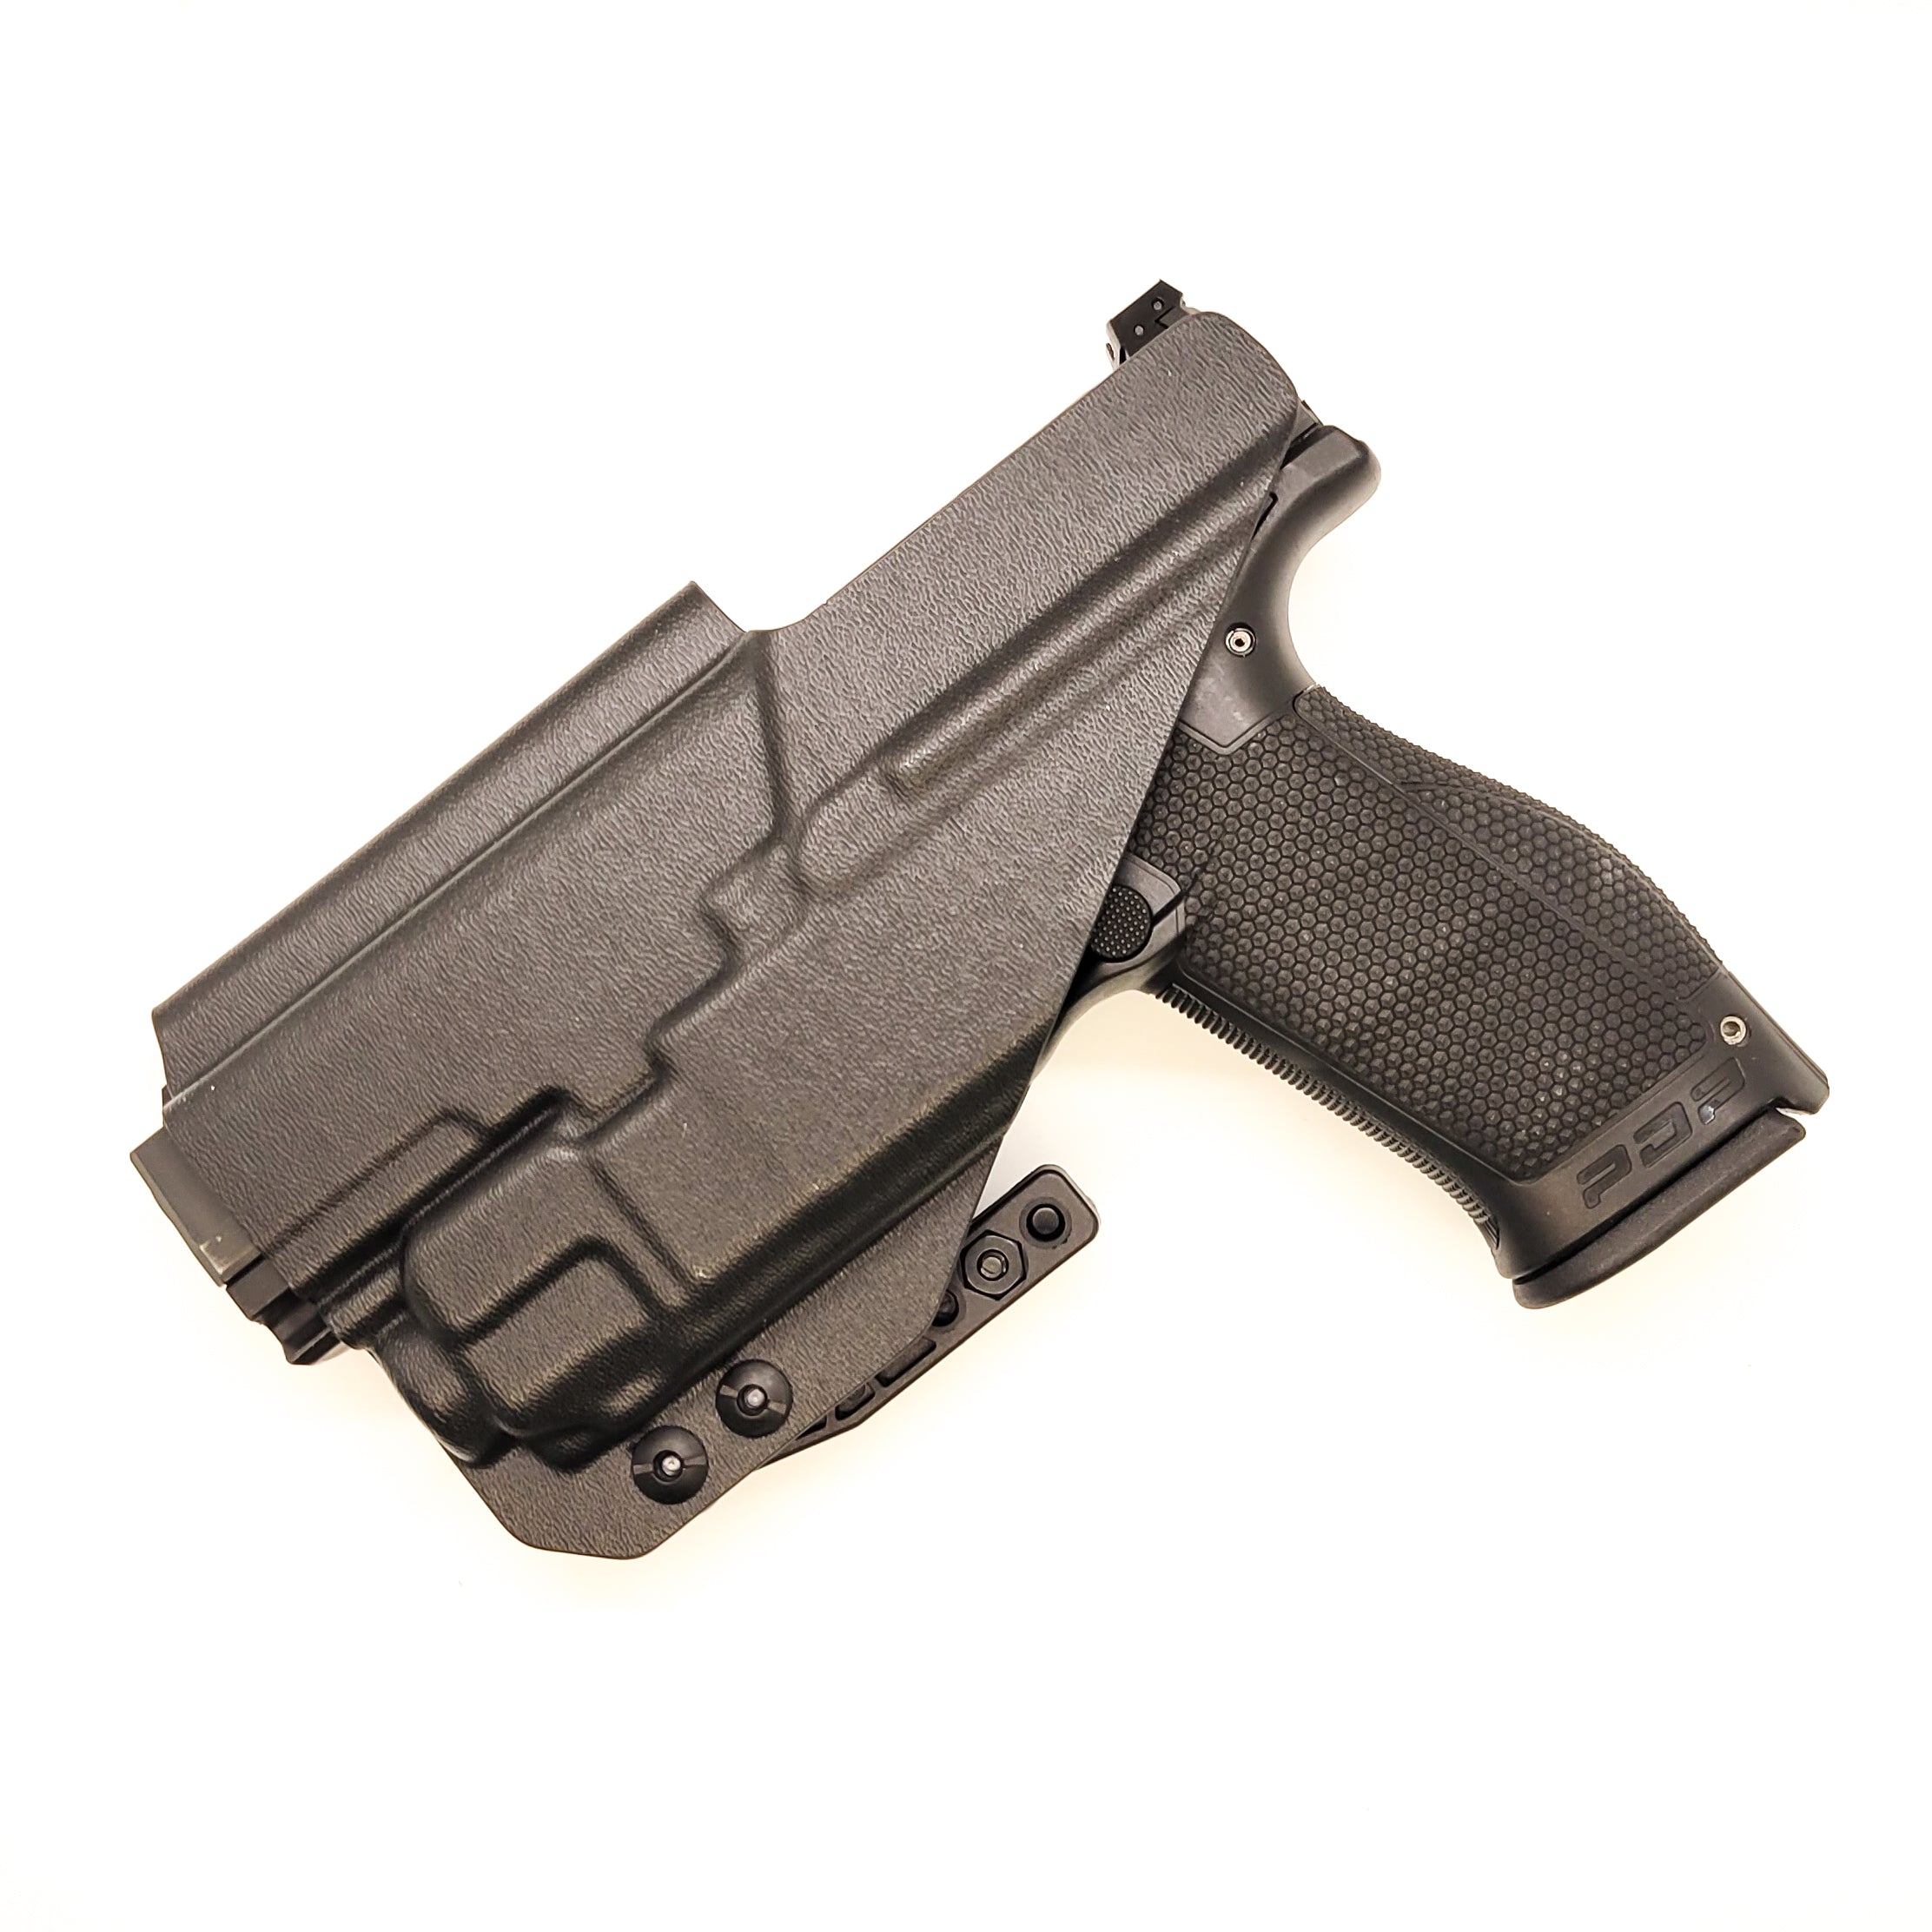 For the best concealed carry Inside Waistband IWB AIWB Holster designed to fit the Walther PDP F Series 4" & 3.5" pistols with Streamlight TLR-8 on the firearm, shop Four Brothers Holsters. Cut for red dot sight, full sweat guard, adjustable retention & open muzzle for threaded barrels & compensators. PDPF TLR8